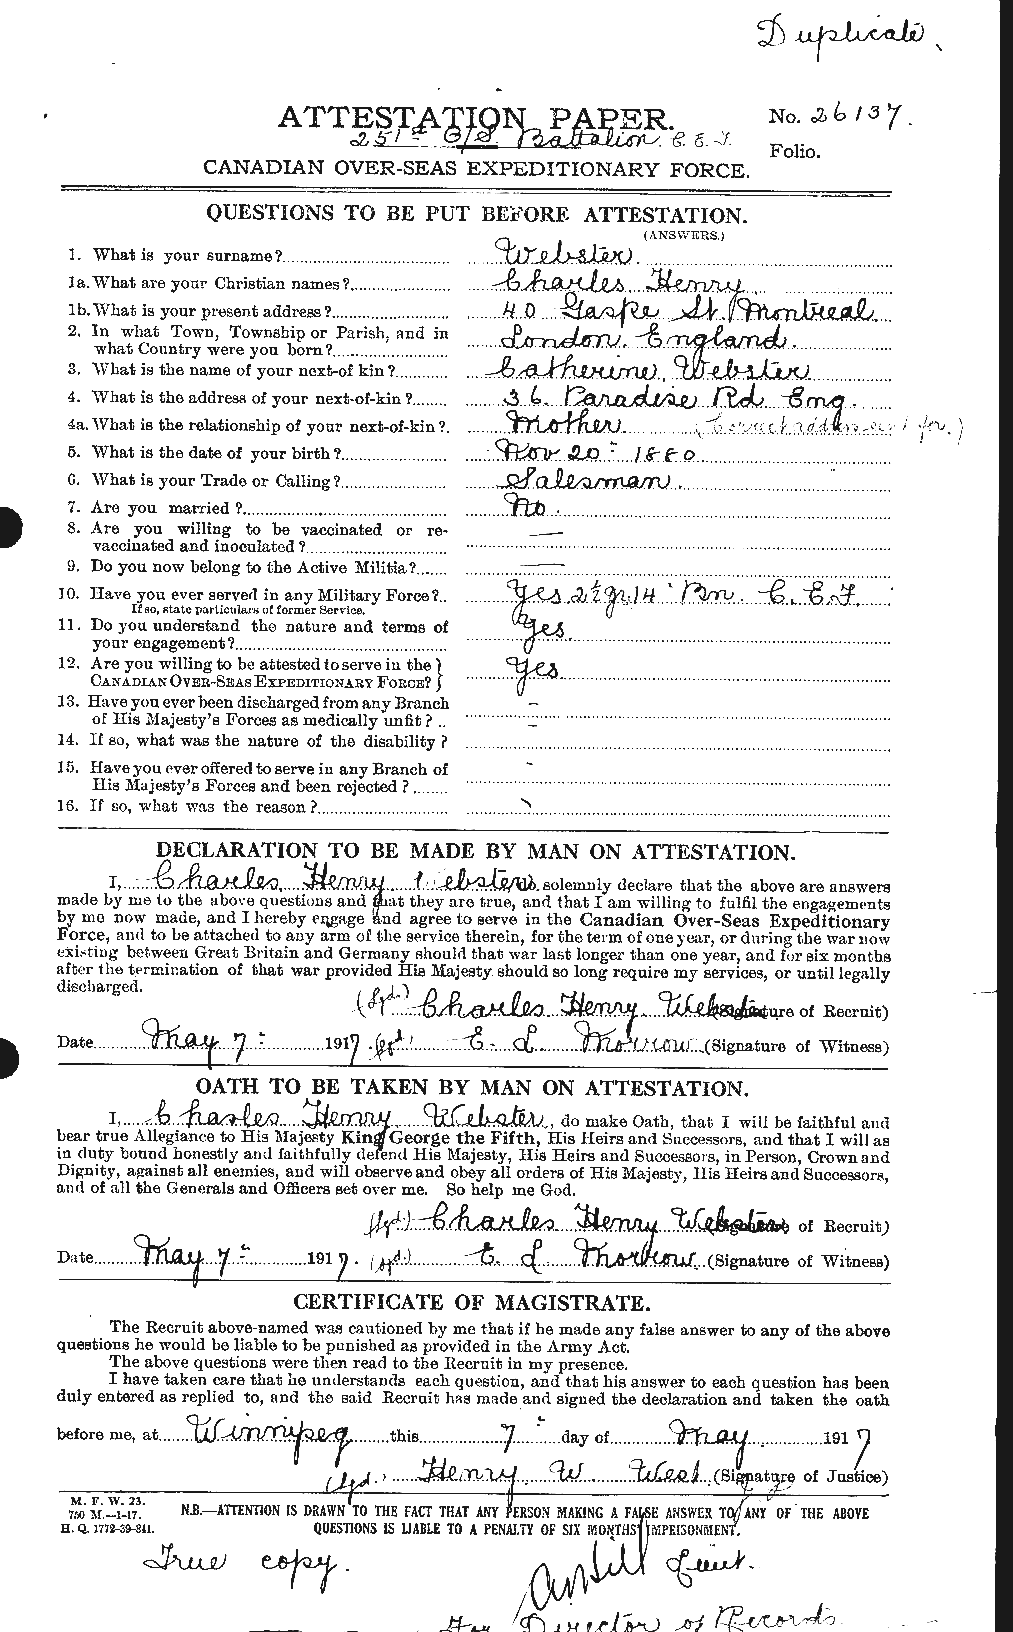 Personnel Records of the First World War - CEF 670295a